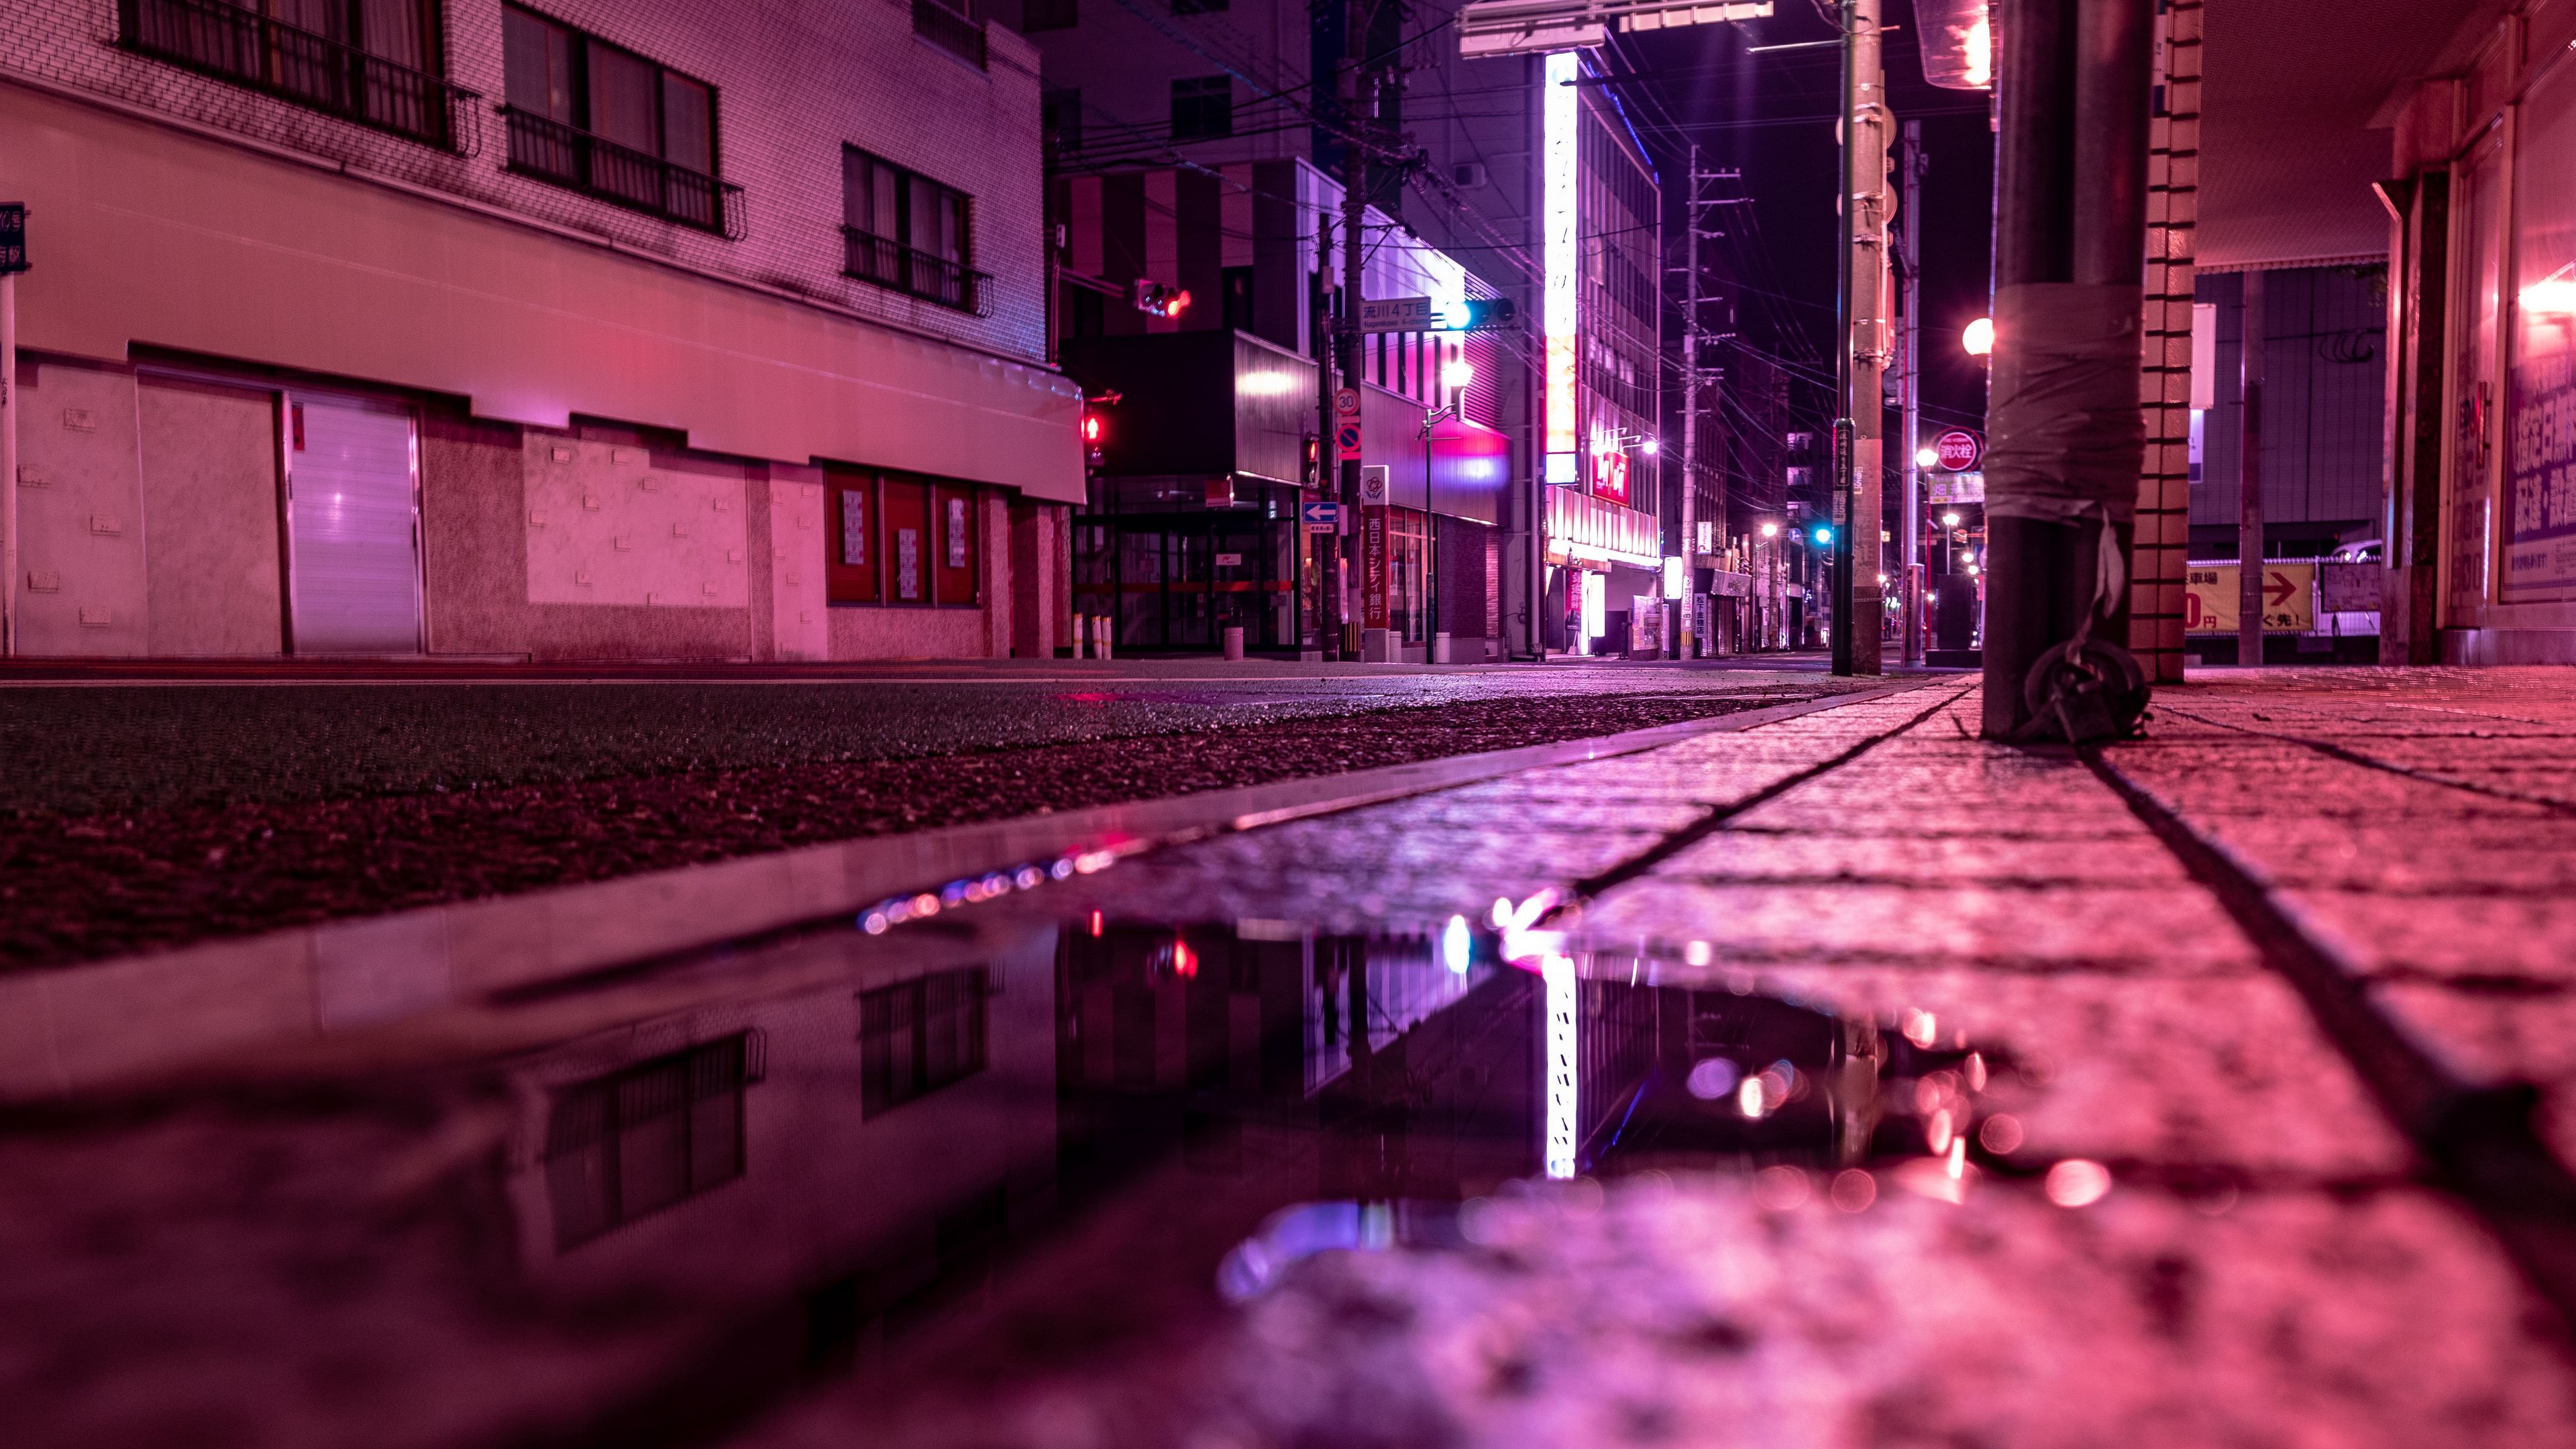 Street 4K wallpaper for your desktop or mobile screen free and easy to download